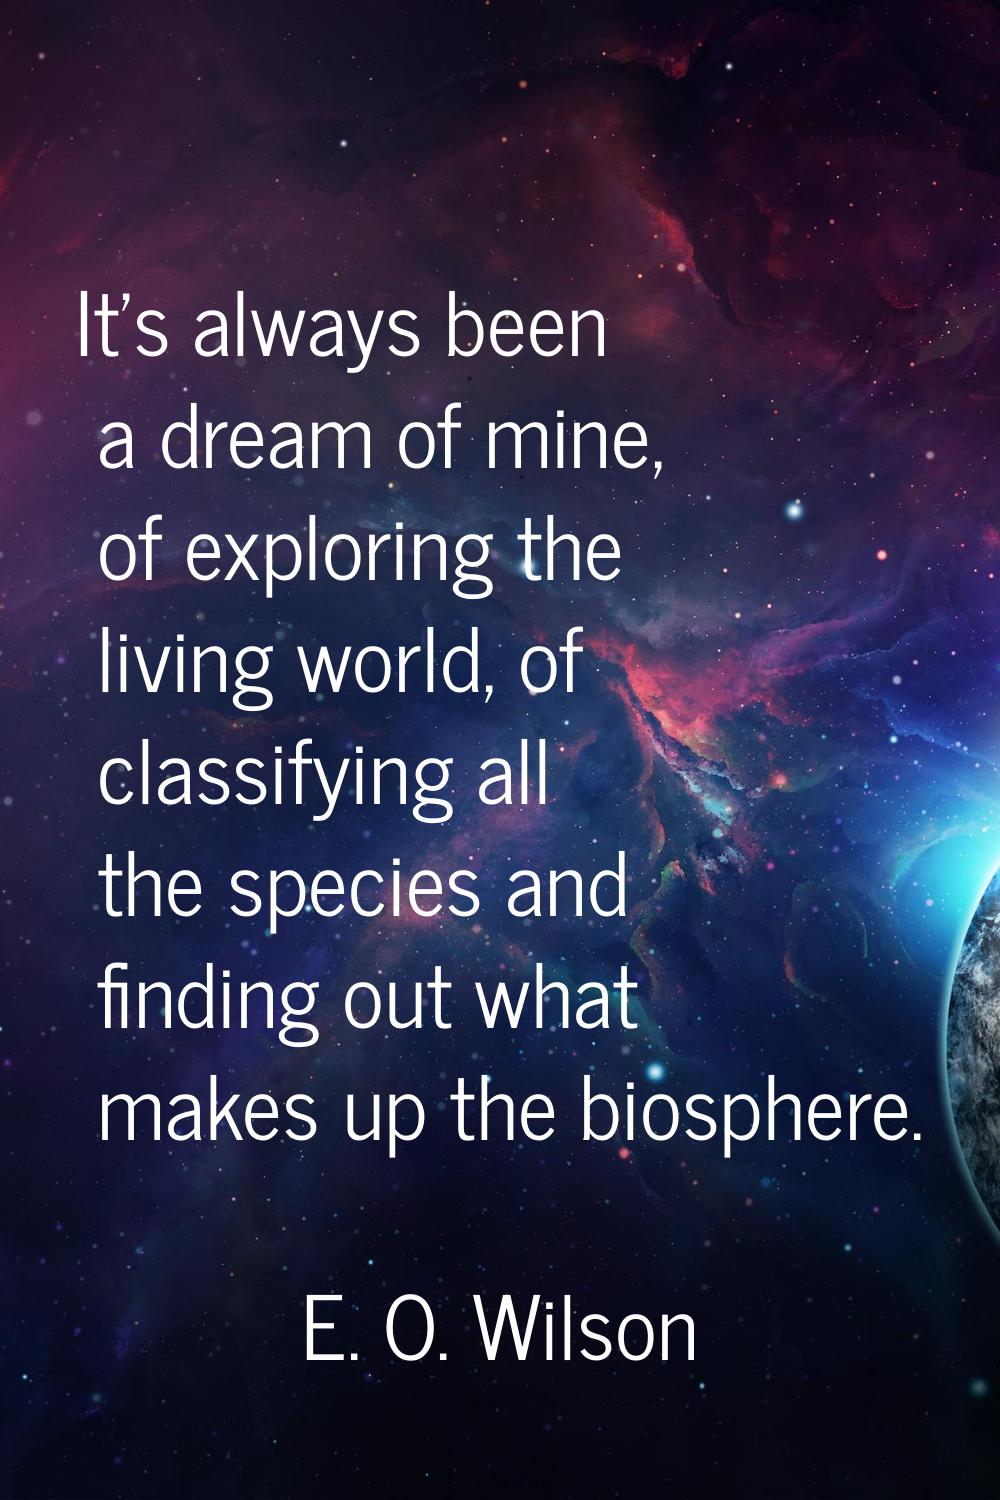 It's always been a dream of mine, of exploring the living world, of classifying all the species and